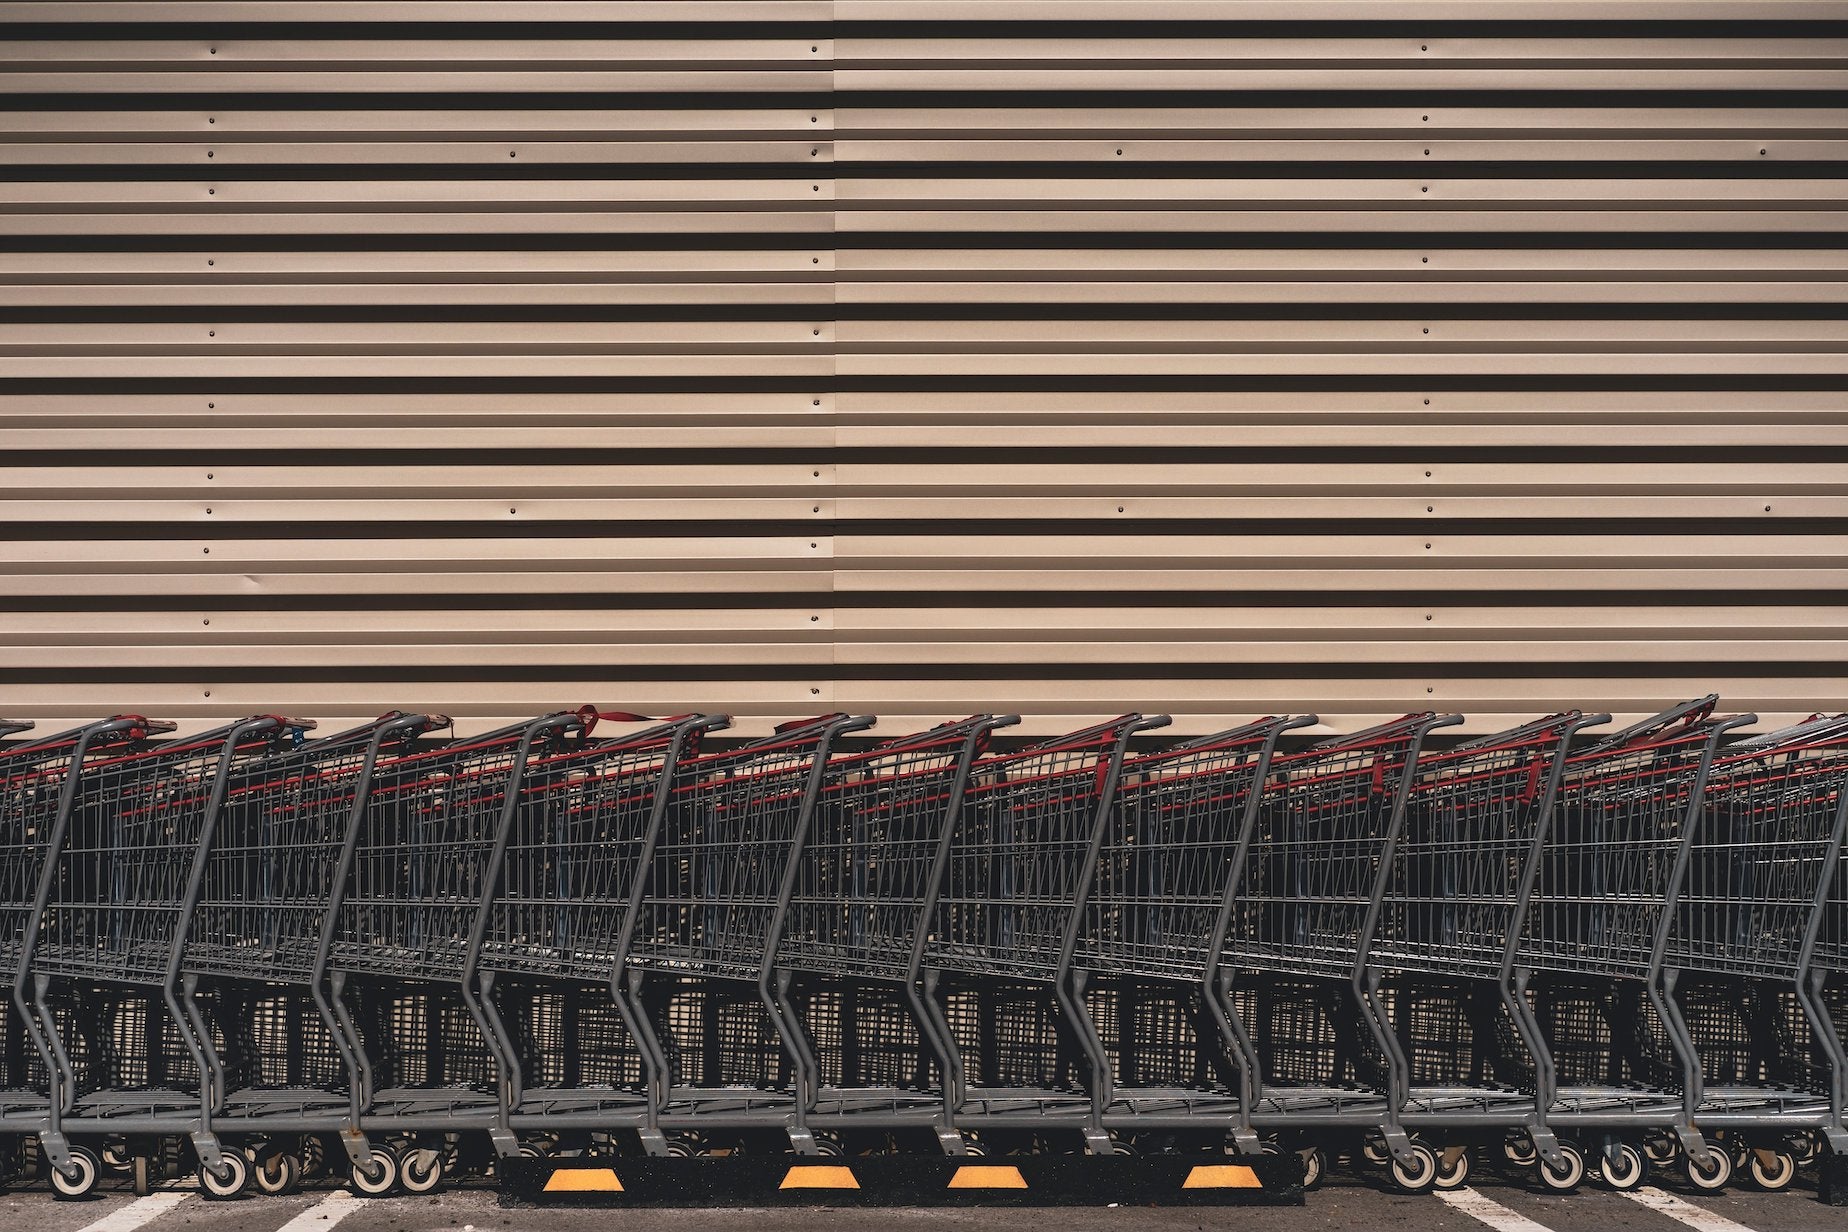 Shopping carts lined up in a straight line against a wall